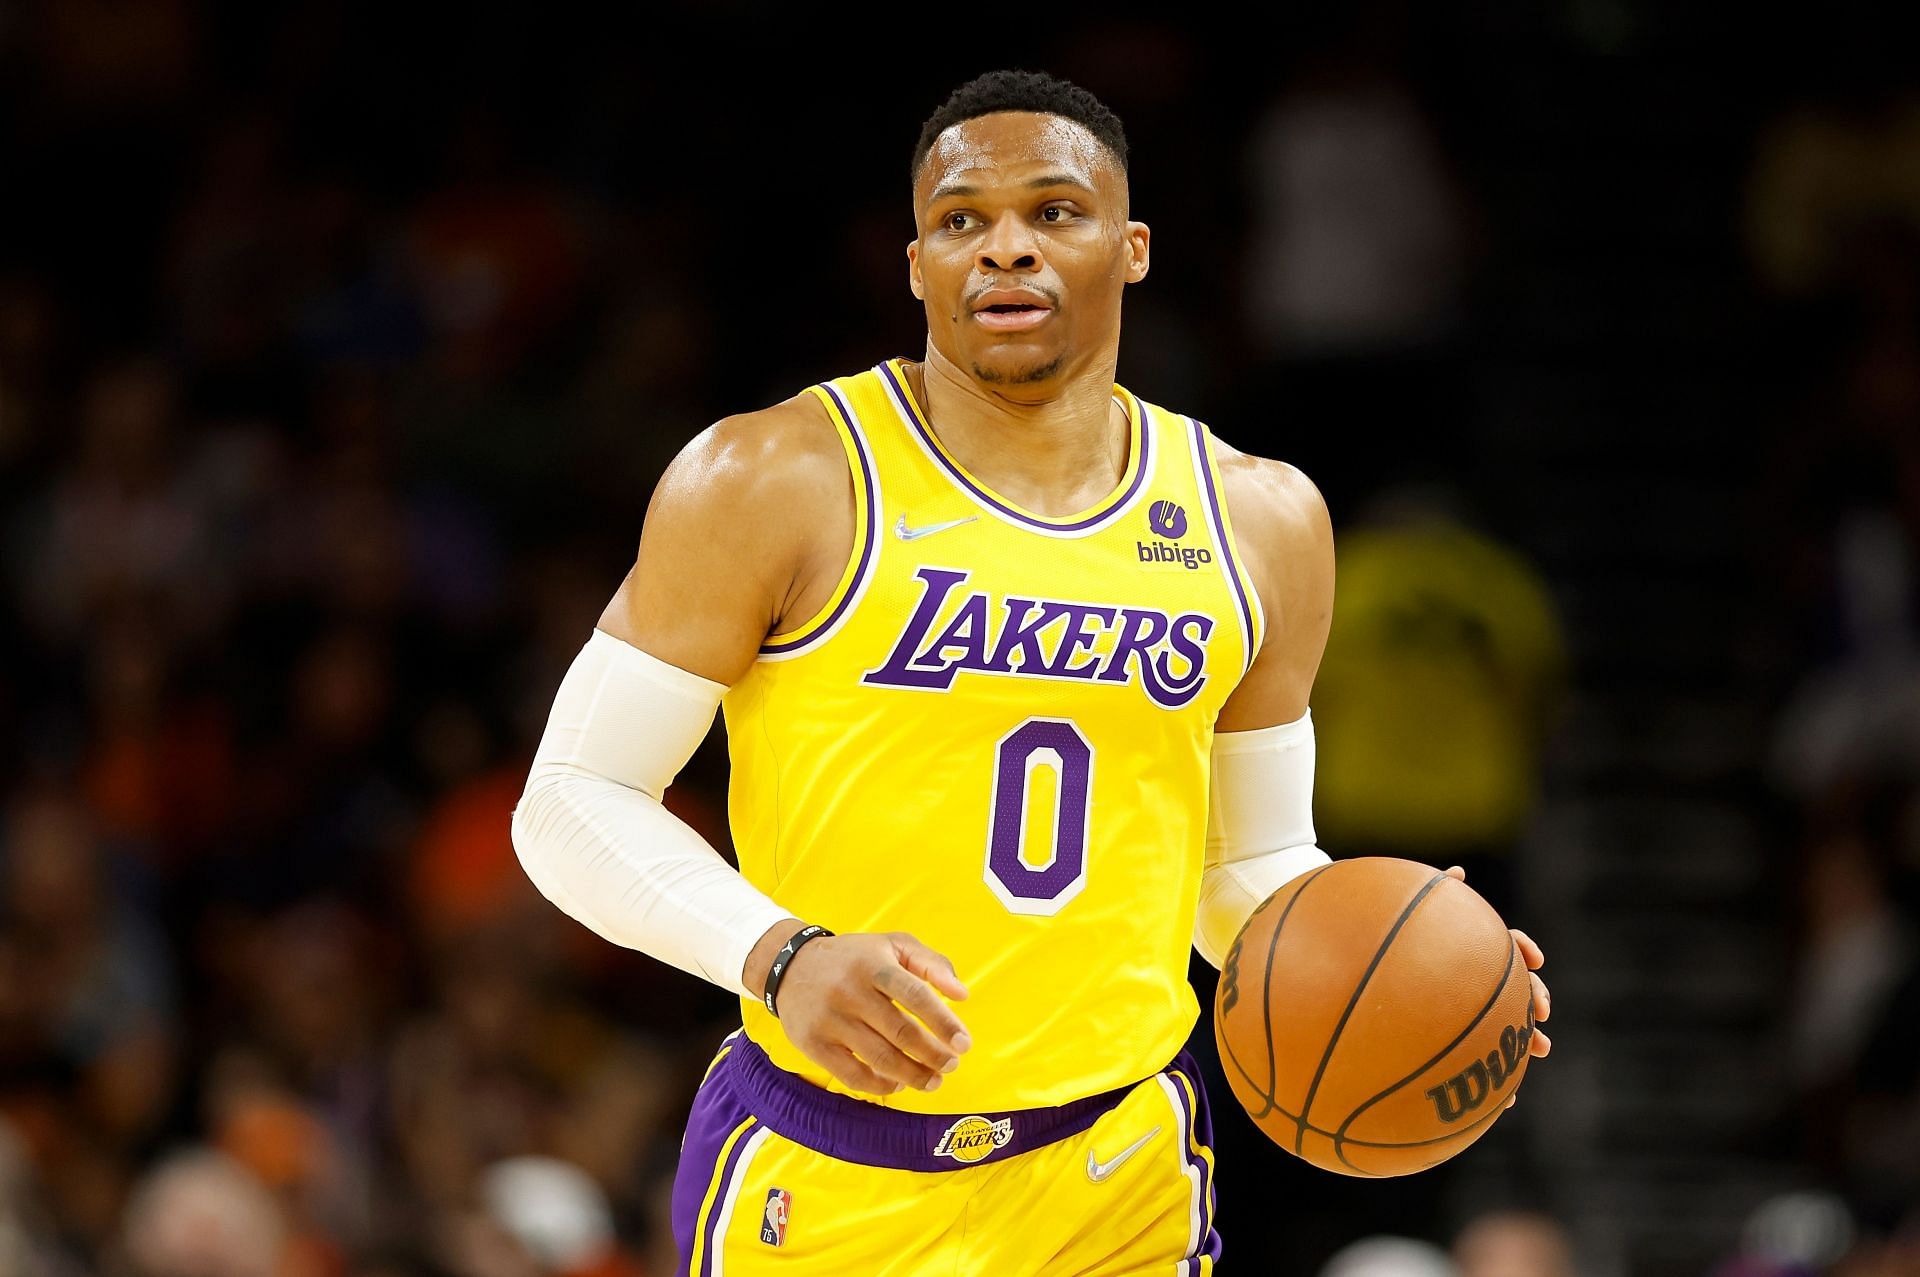 The LA Lakers' Russell Westbrook handles the ball at the Footprint Center on April 5 in Phoenix, Arizona.